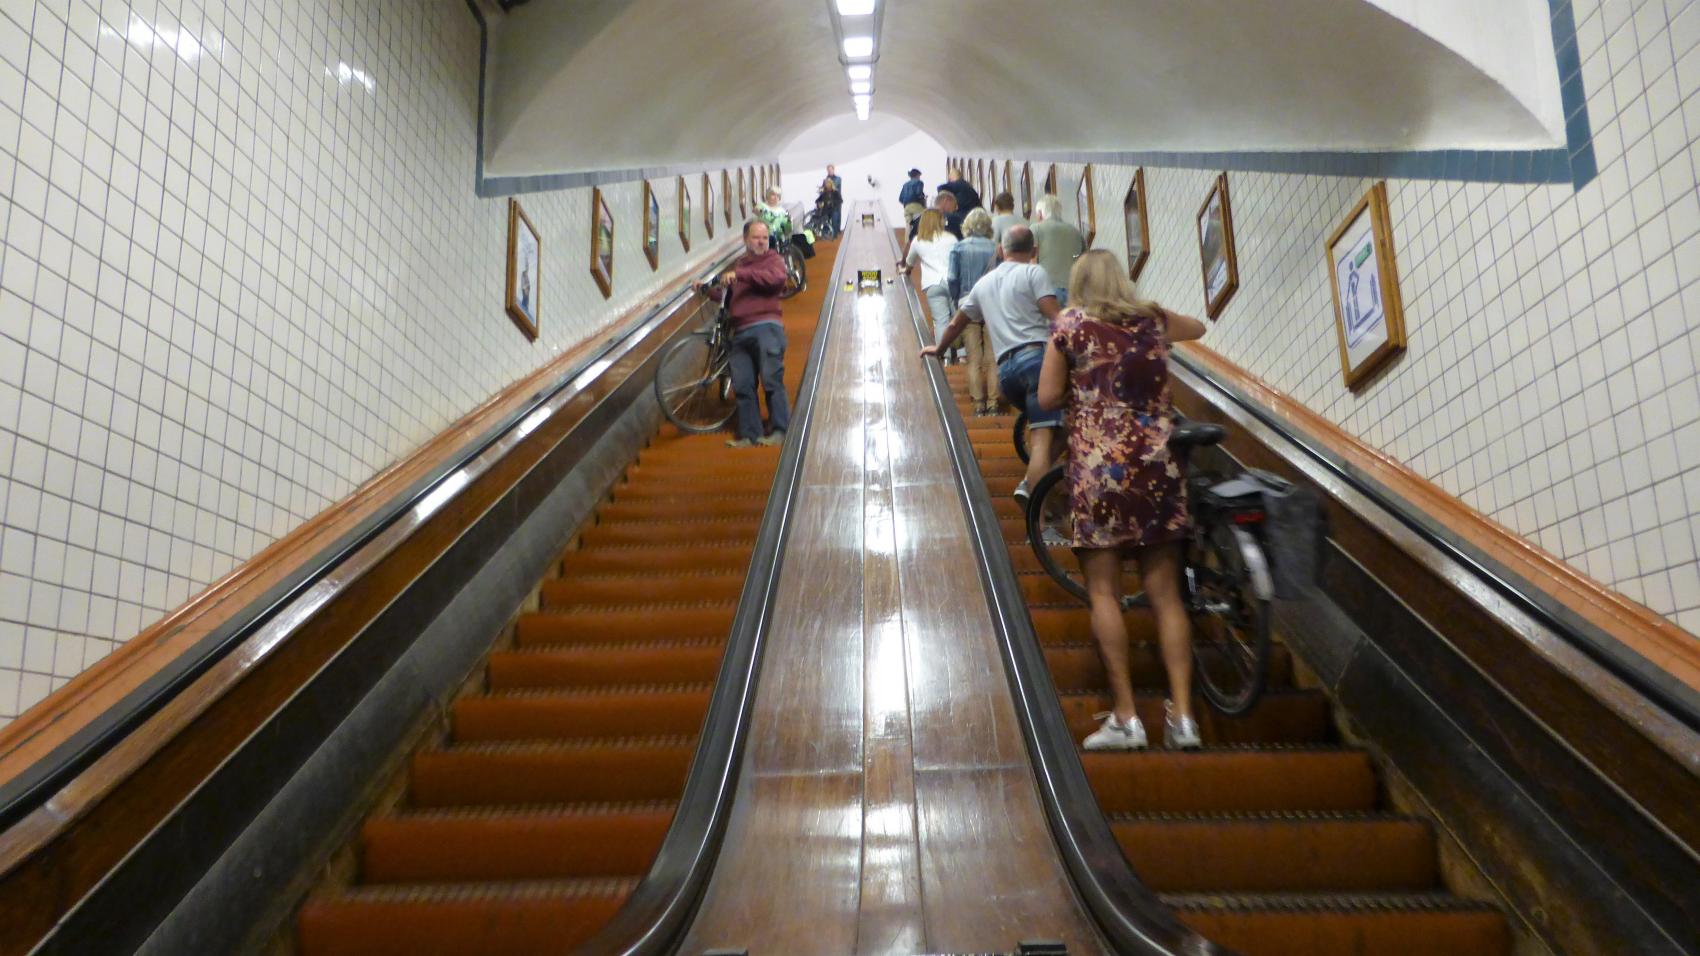 Most of cyclists use historic escalators to access the tunnel.